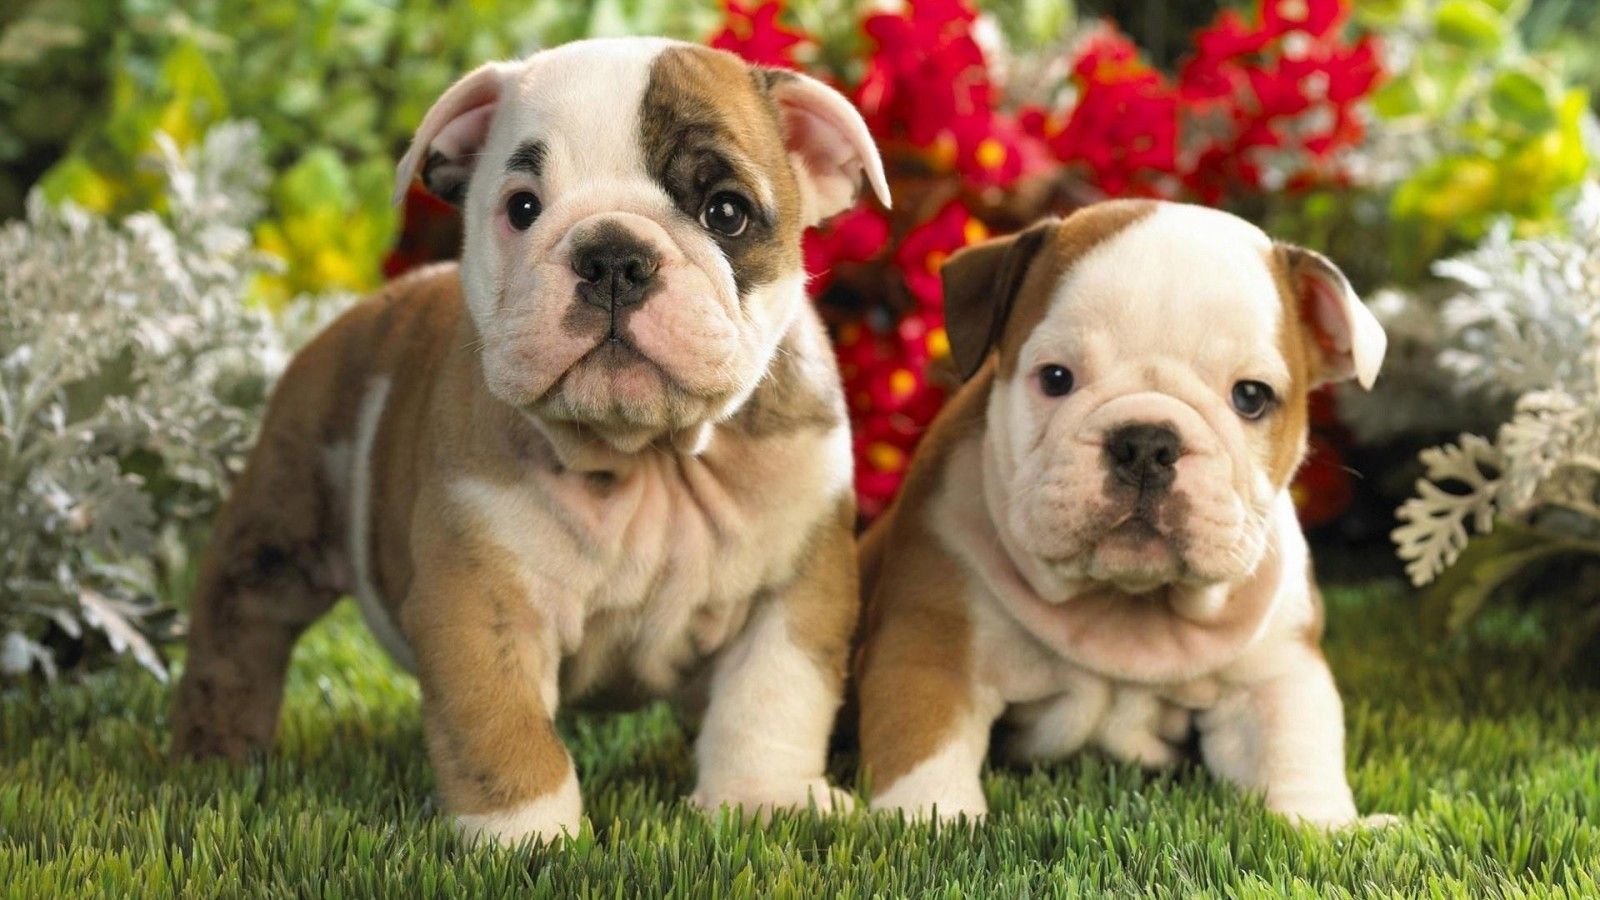 Dog, Cute, And Puppy Image Dog Cute Puppies